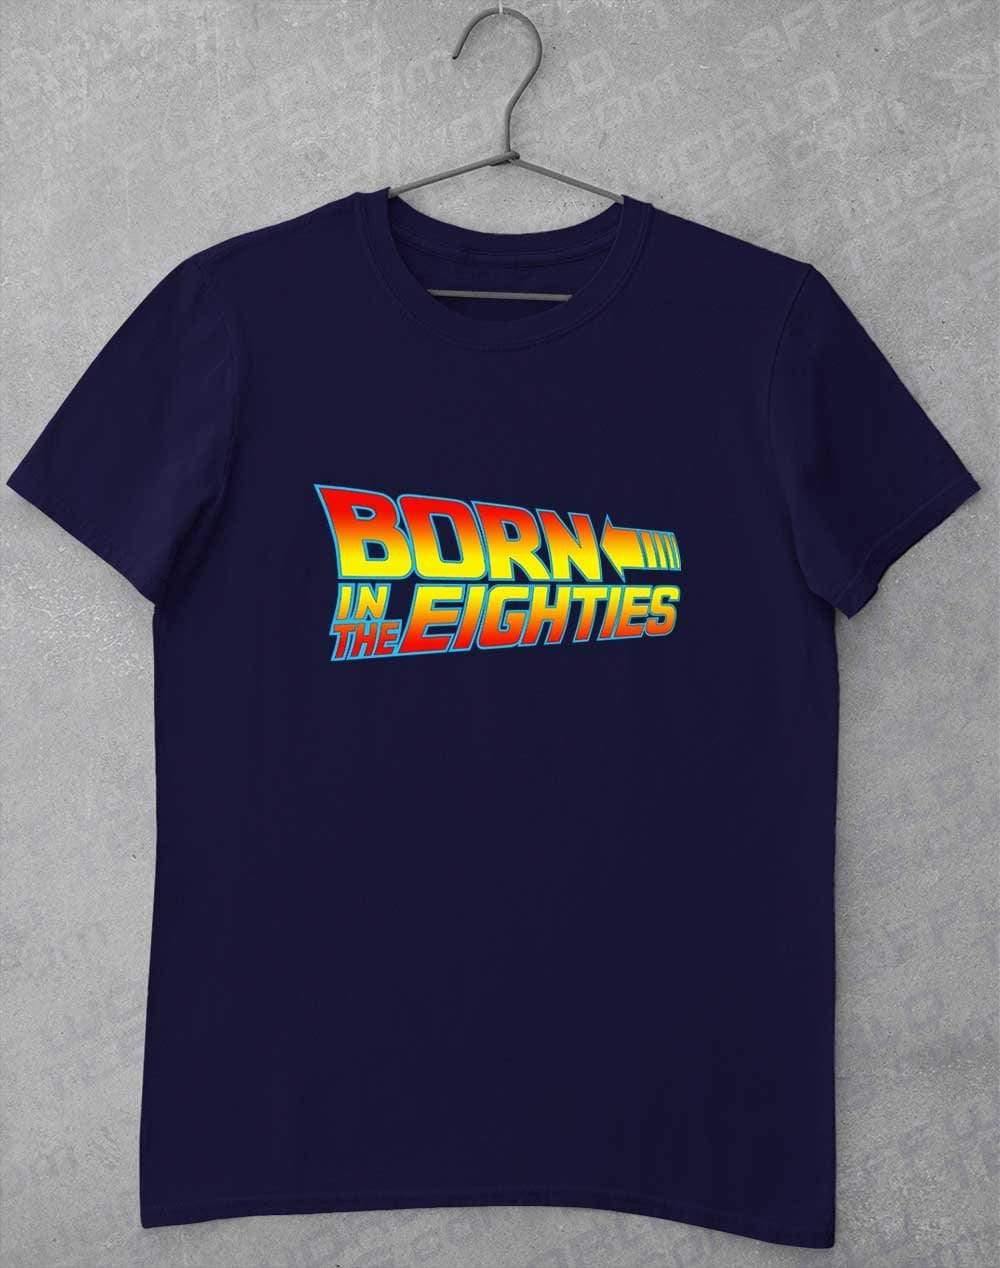 Born in the... (CHOOSE YOUR DECADE!) T-shirt THE EIGHTIES - Navy / S  - Off World Tees